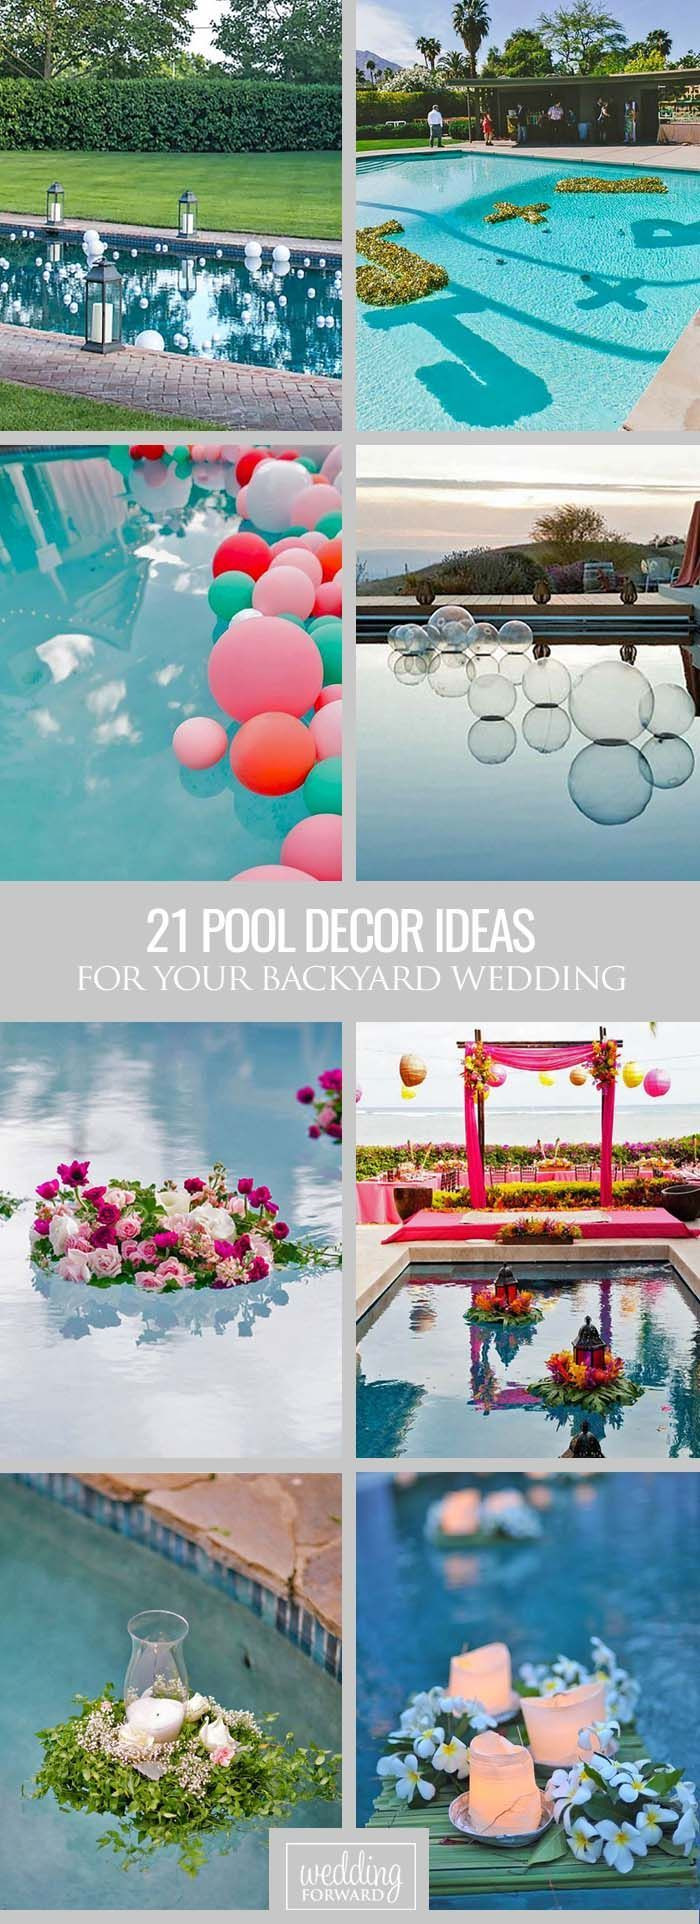 Poolside Party Decoration Ideas
 Best 25 Floating pool decorations ideas on Pinterest